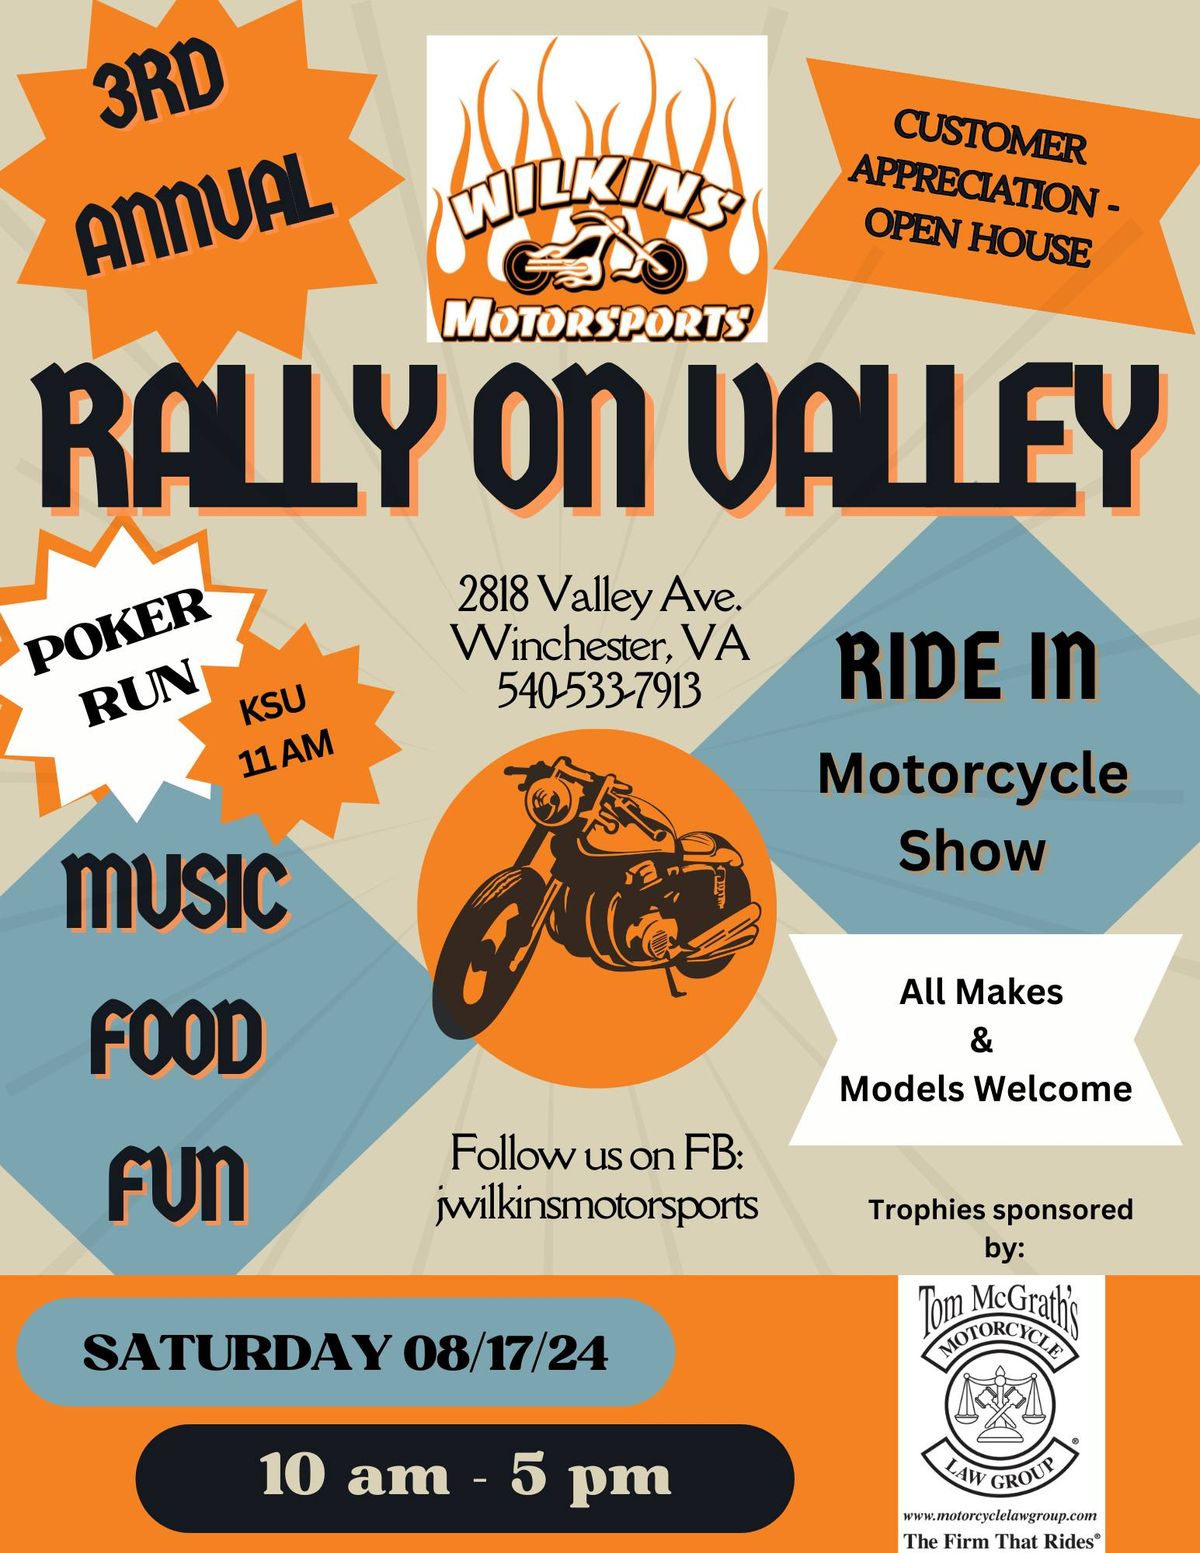 RALLY ON VALLEY